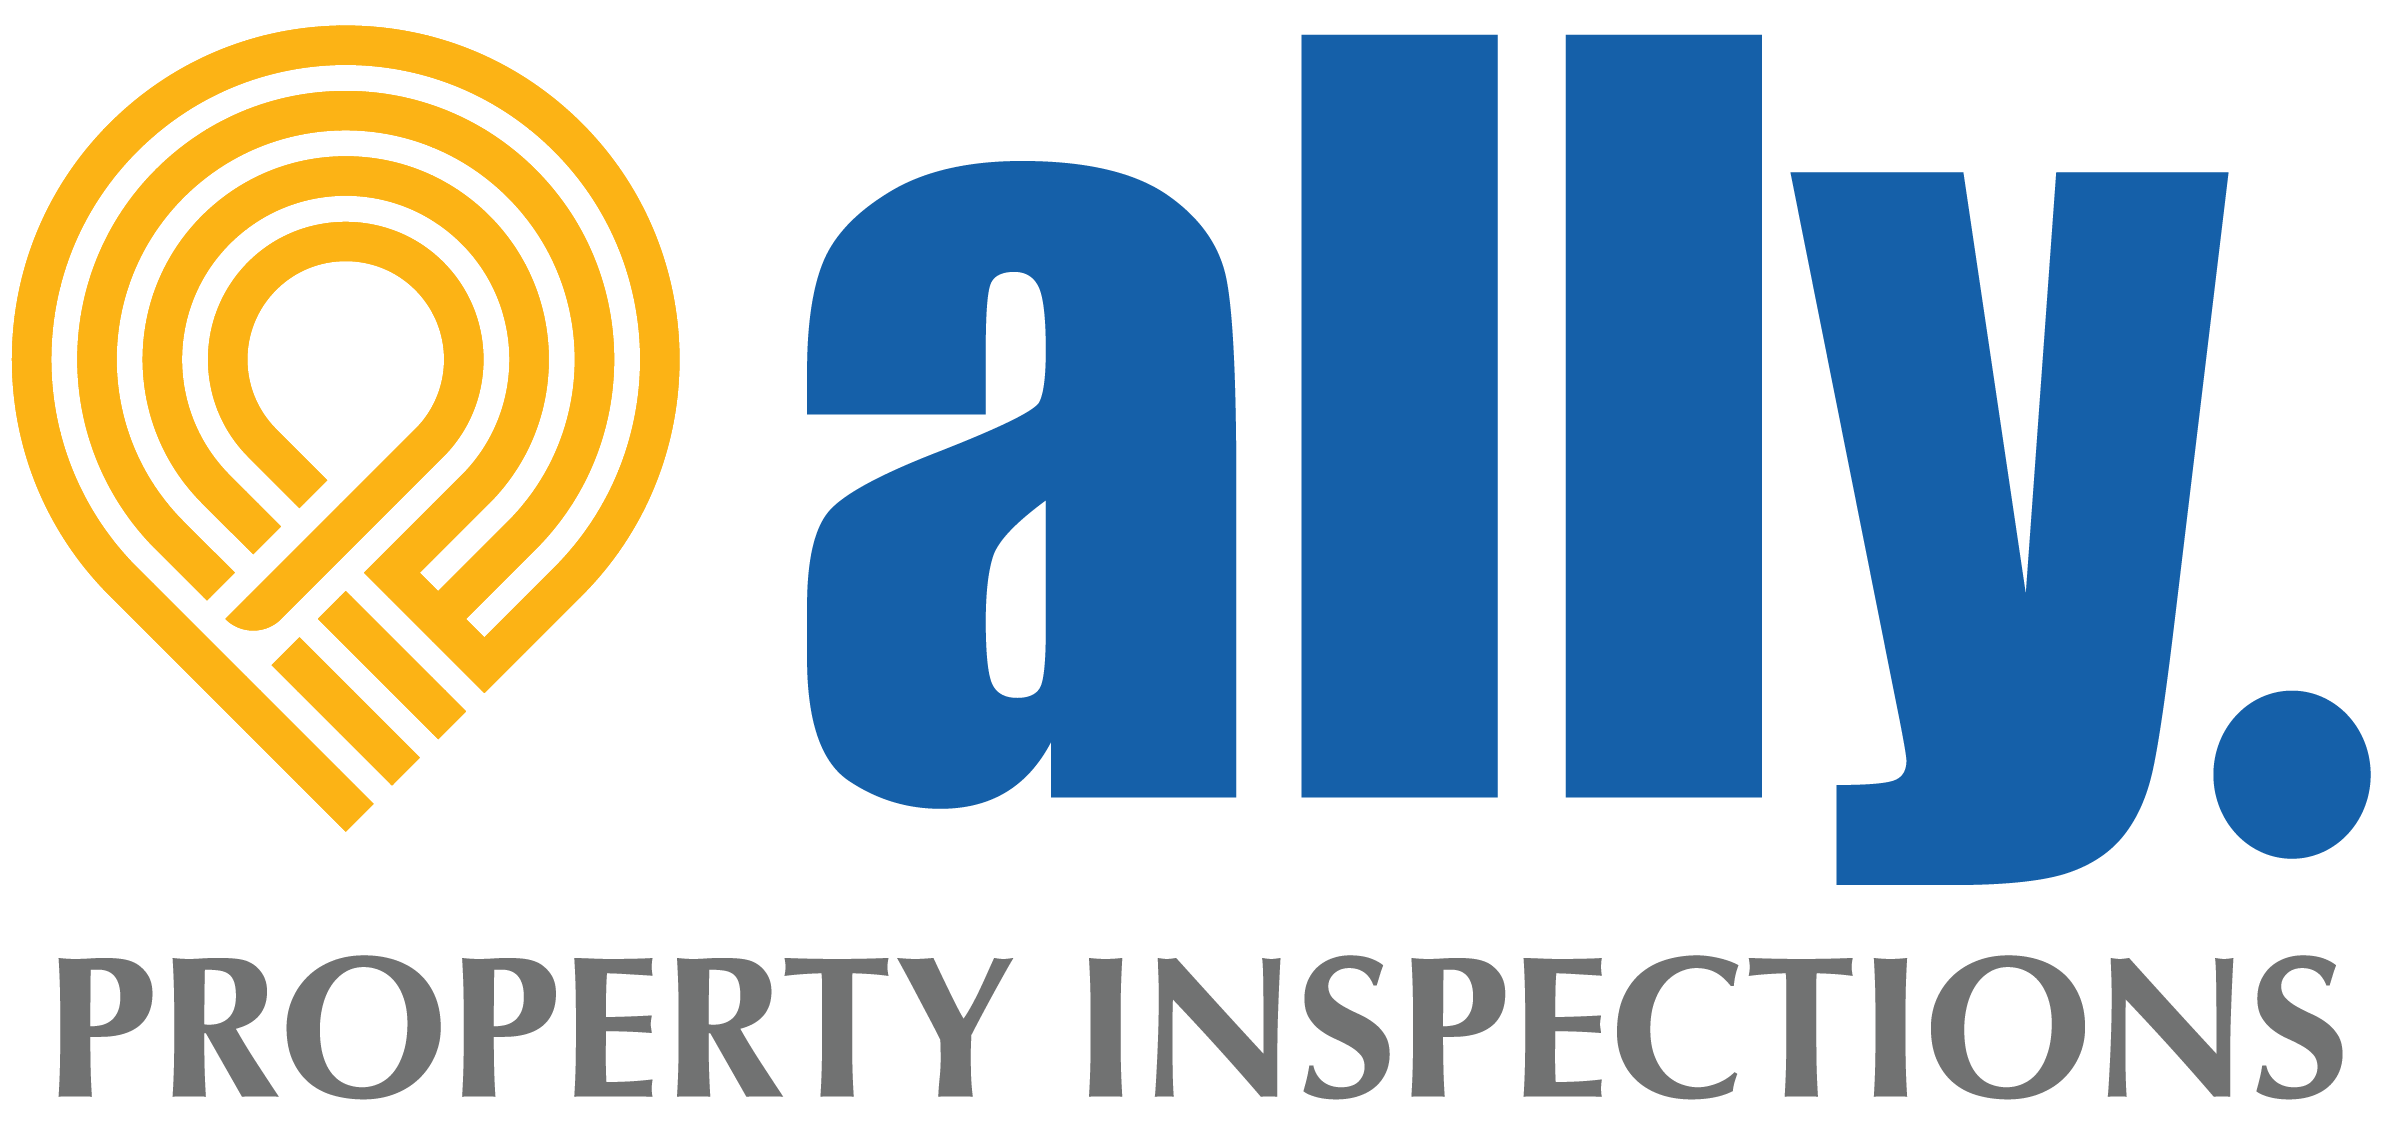 https://allypropertyinspections.com/wp-content/uploads/2020/12/cropped-ALLY_Logo_400x600.png